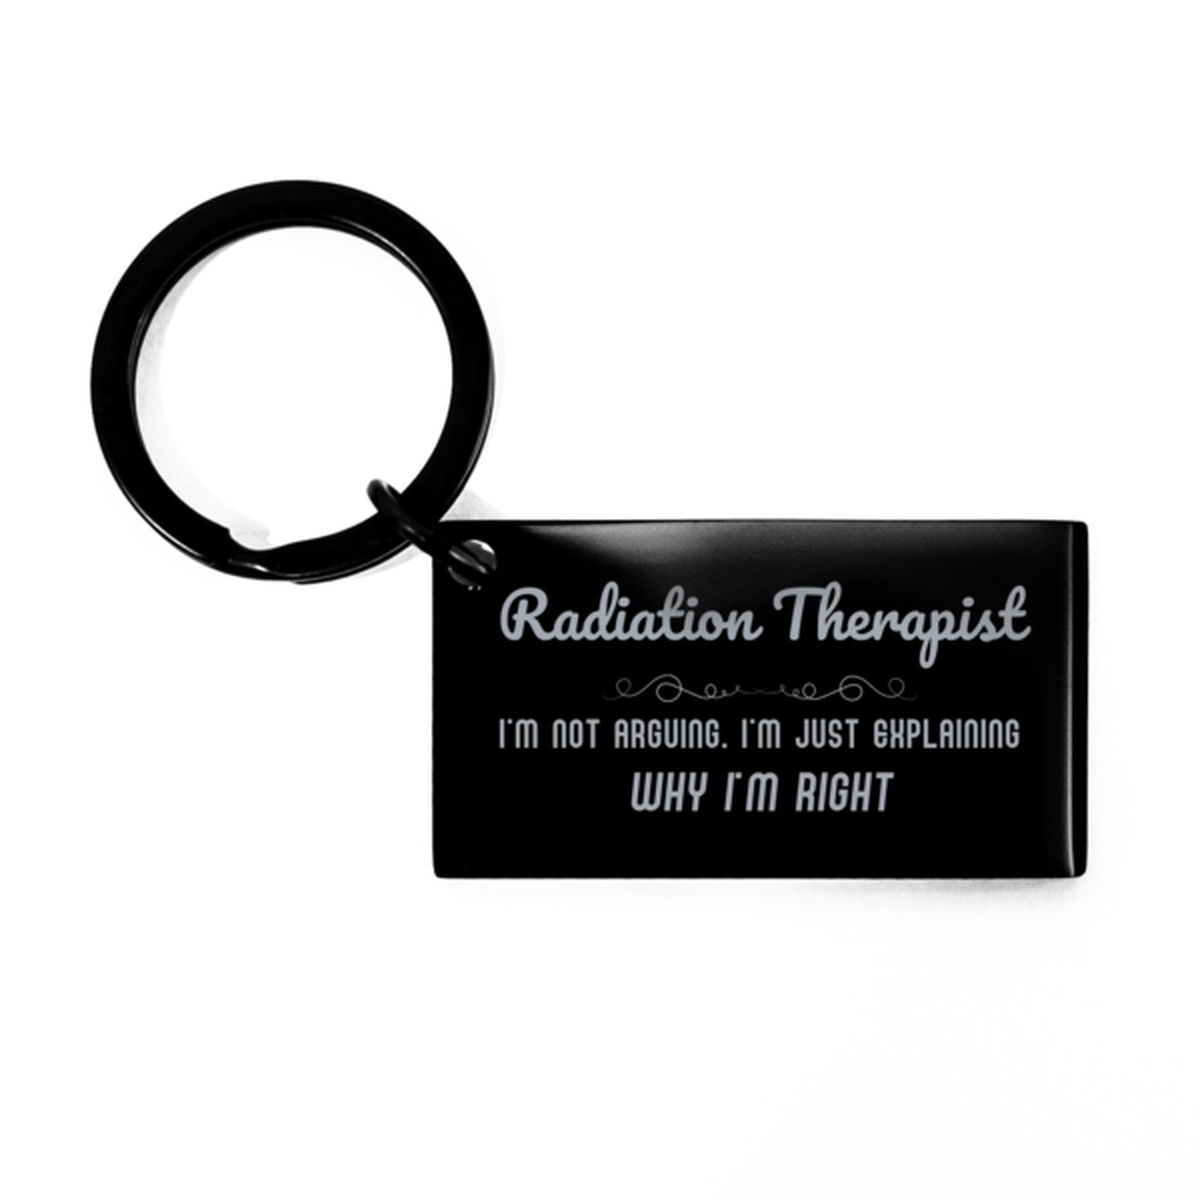 Radiation Therapist I'm not Arguing. I'm Just Explaining Why I'm RIGHT Keychain, Funny Saying Quote Radiation Therapist Gifts For Radiation Therapist Graduation Birthday Christmas Gifts for Men Women Coworker